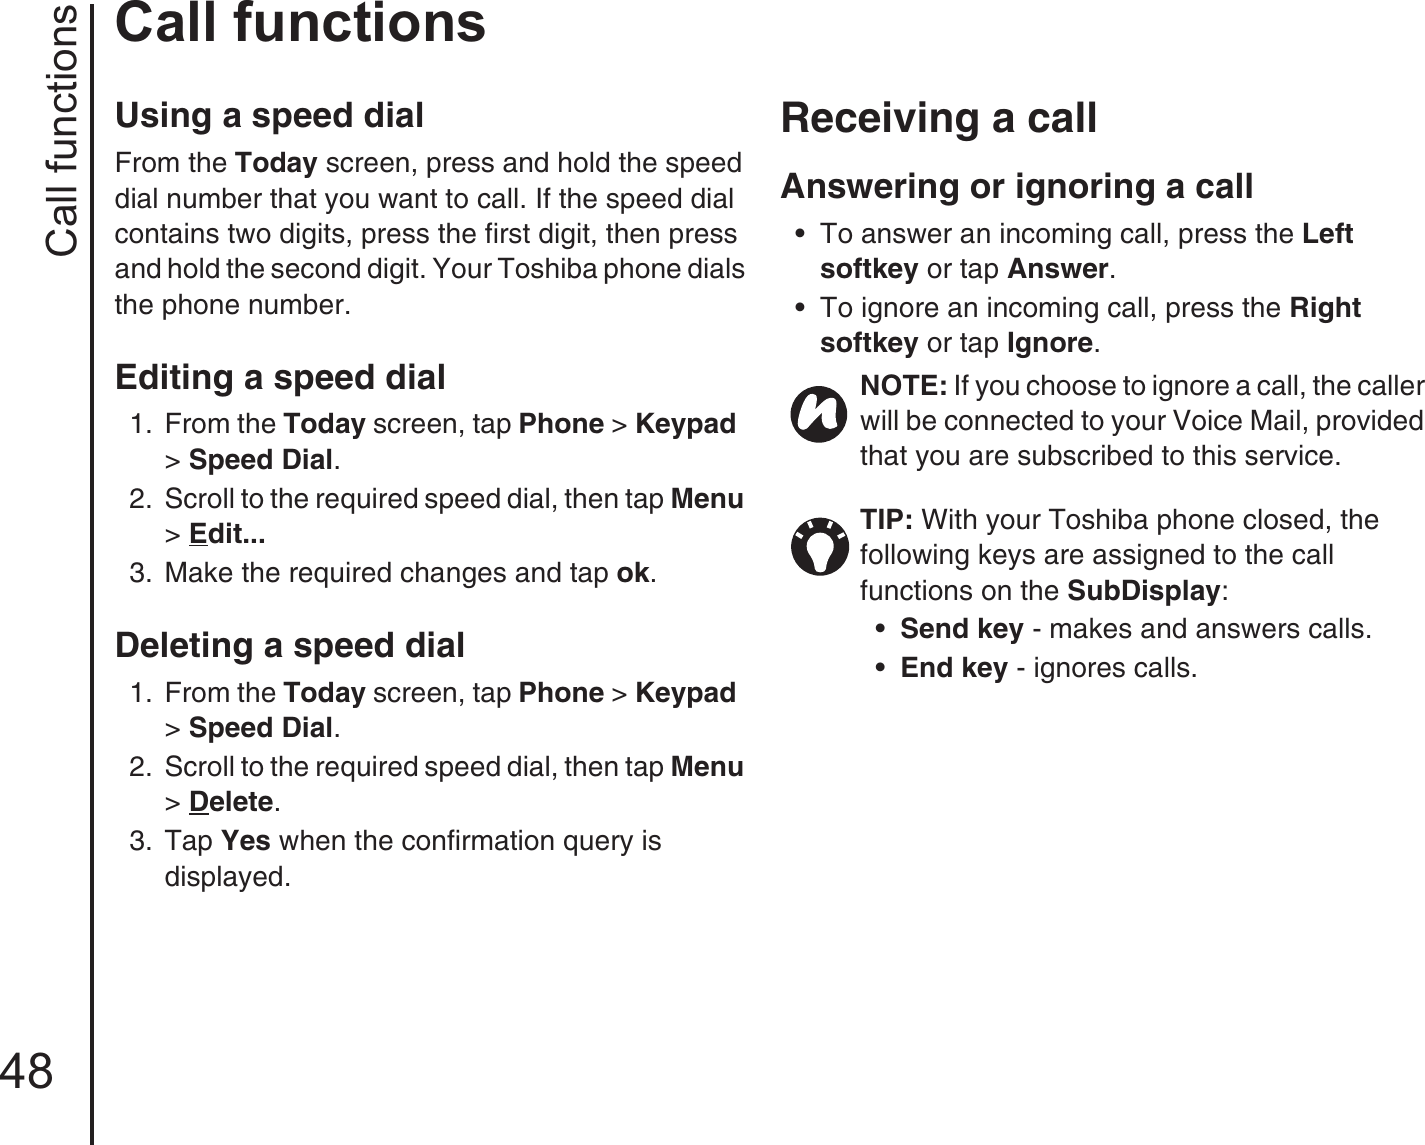 Call functions48Call functionsUsing a speed dialFrom the Today screen, press and hold the speed dial number that you want to call. If the speed dial contains two digits, press the first digit, then press and hold the second digit. Your Toshiba phone dials the phone number.Editing a speed dial 1.  From the Today screen, tap Phone &gt; Keypad  &gt; Speed Dial. 2.  Scroll to the required speed dial, then tap Menu &gt; Edit... 3.  Make the required changes and tap ok.Deleting a speed dial 1.  From the Today screen, tap Phone &gt; Keypad  &gt; Speed Dial. 2.  Scroll to the required speed dial, then tap Menu &gt; Delete. 3.  Tap Yes when the confirmation query is displayed.Receiving a callAnswering or ignoring a call • To answer an incoming call, press the Left softkey or tap Answer. • To ignore an incoming call, press the Right softkey or tap Ignore. NOTE: If you choose to ignore a call, the caller will be connected to your Voice Mail, provided that you are subscribed to this service.TIP: With your Toshiba phone closed, the following keys are assigned to the call functions on the SubDisplay:•Send key - makes and answers calls.•End key - ignores calls.